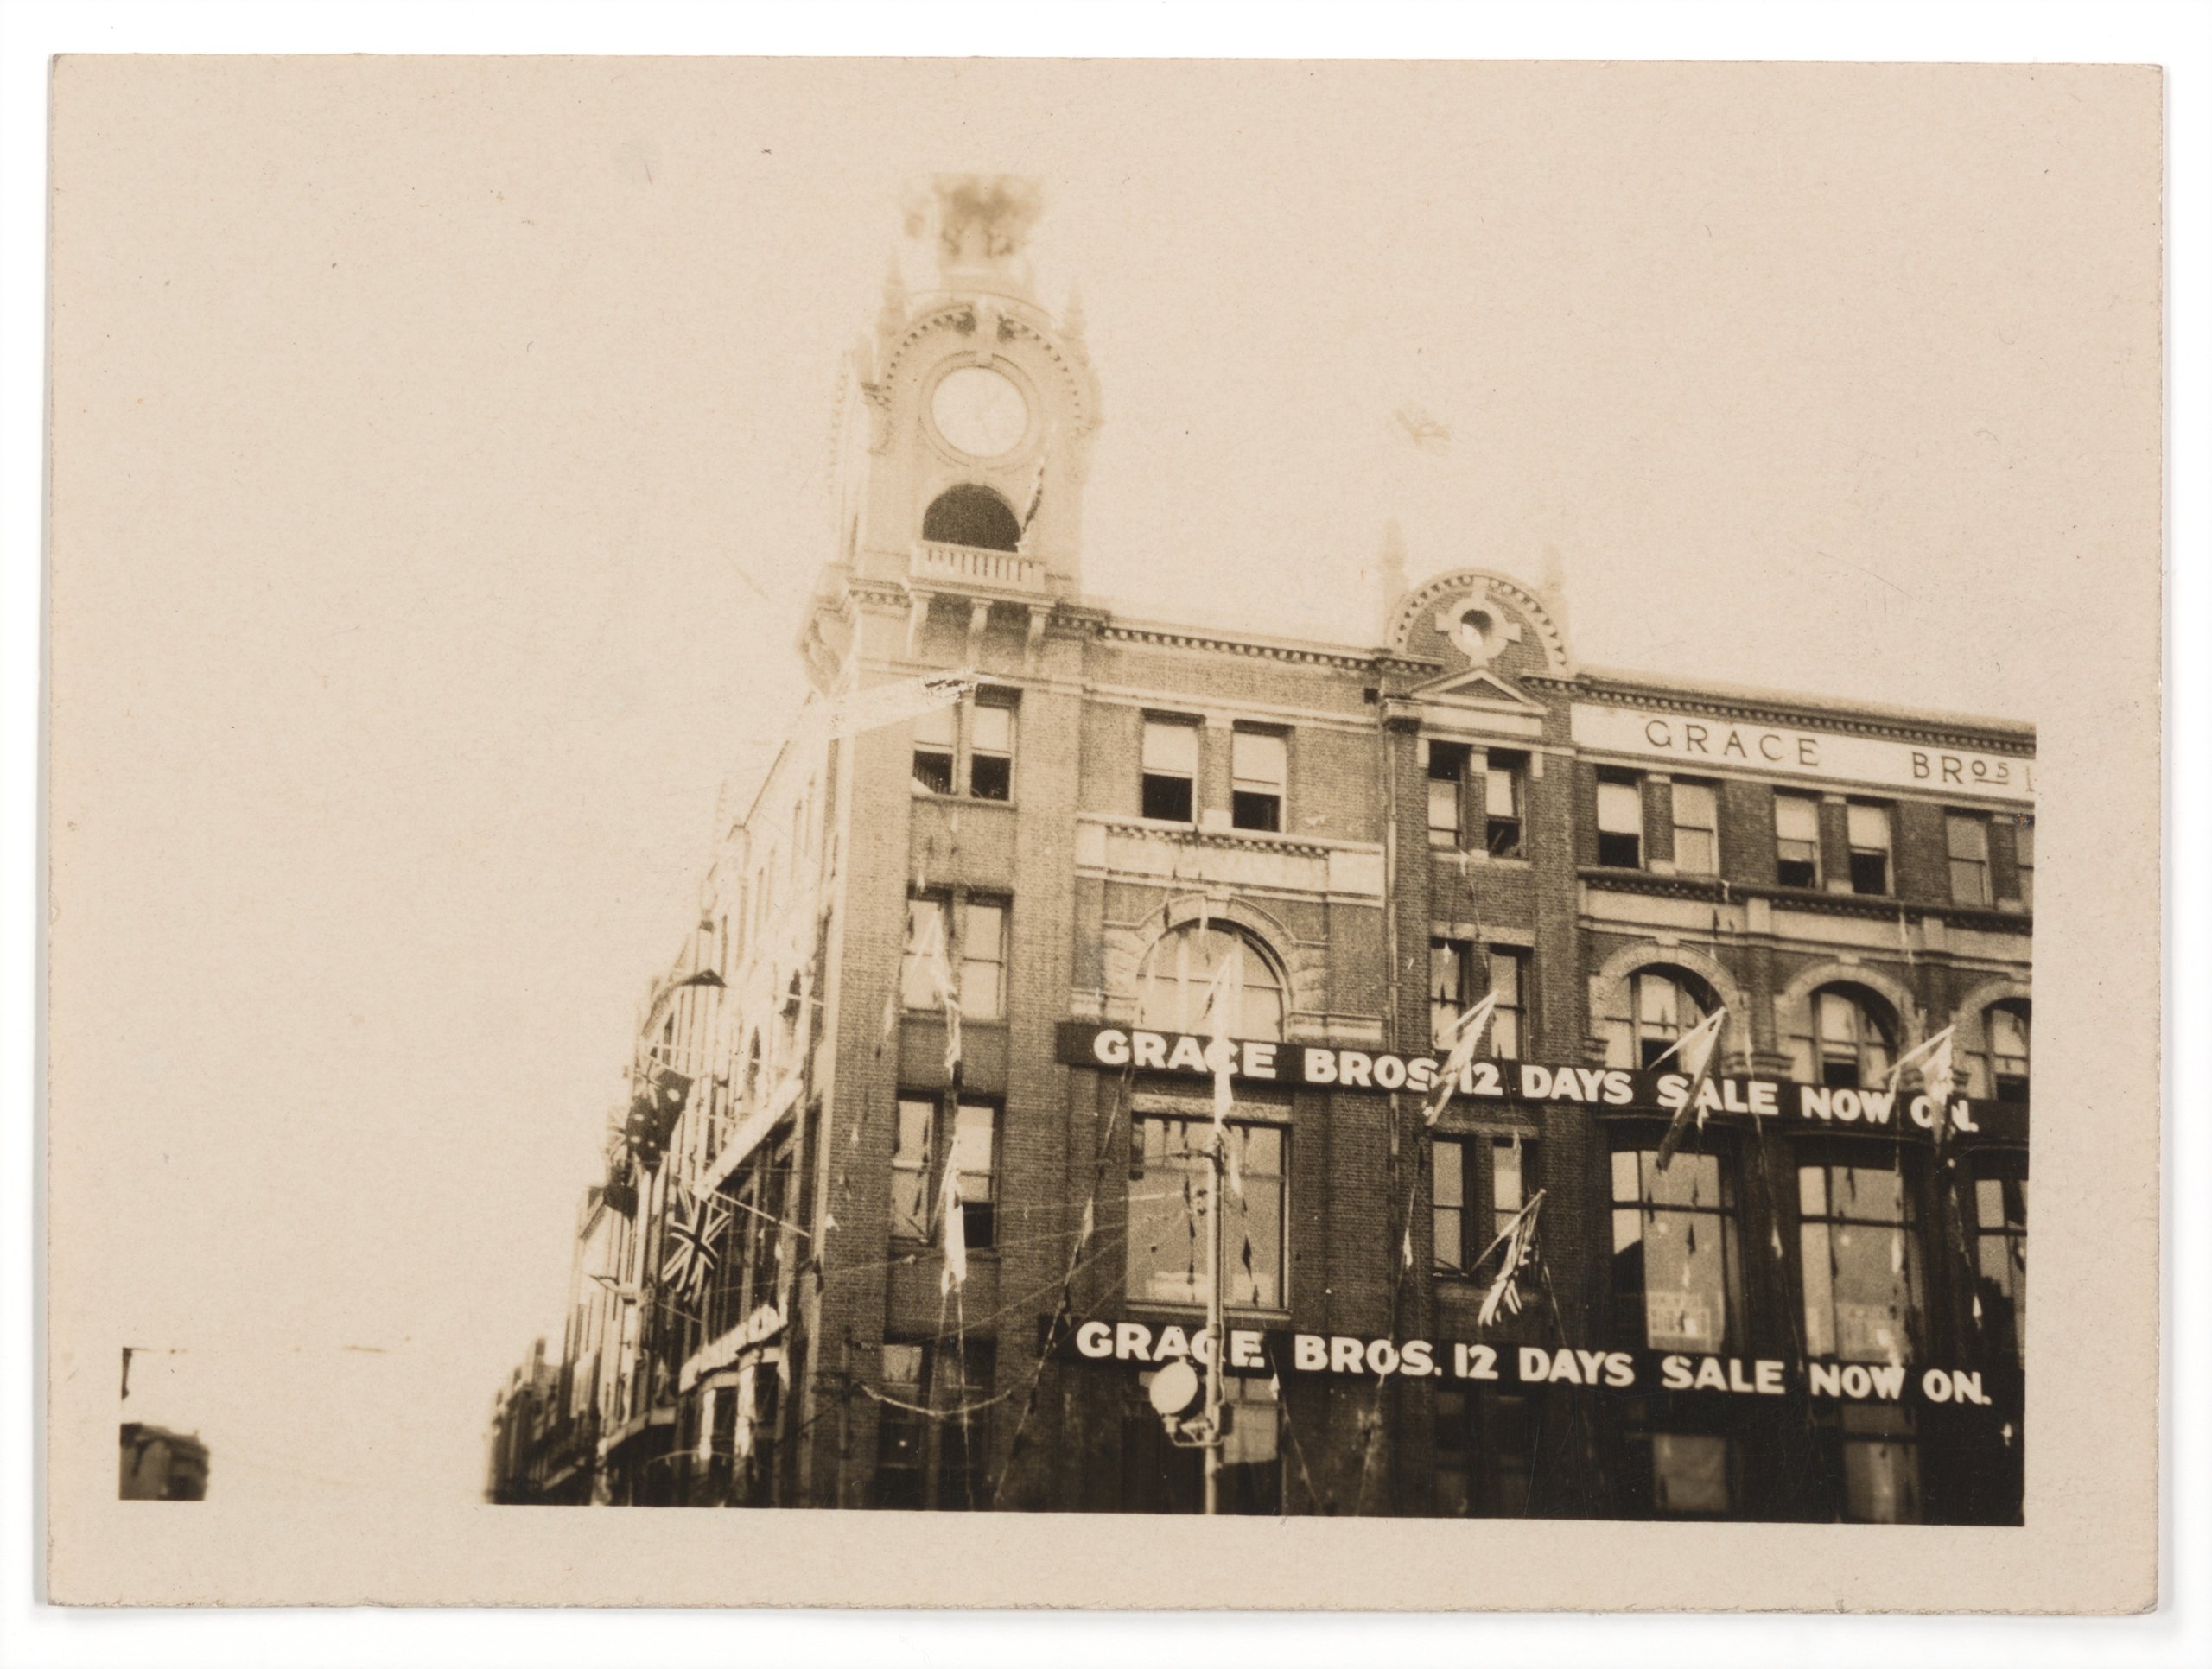 Photograph of advertising signs for Grace Bros 12 Days Sale